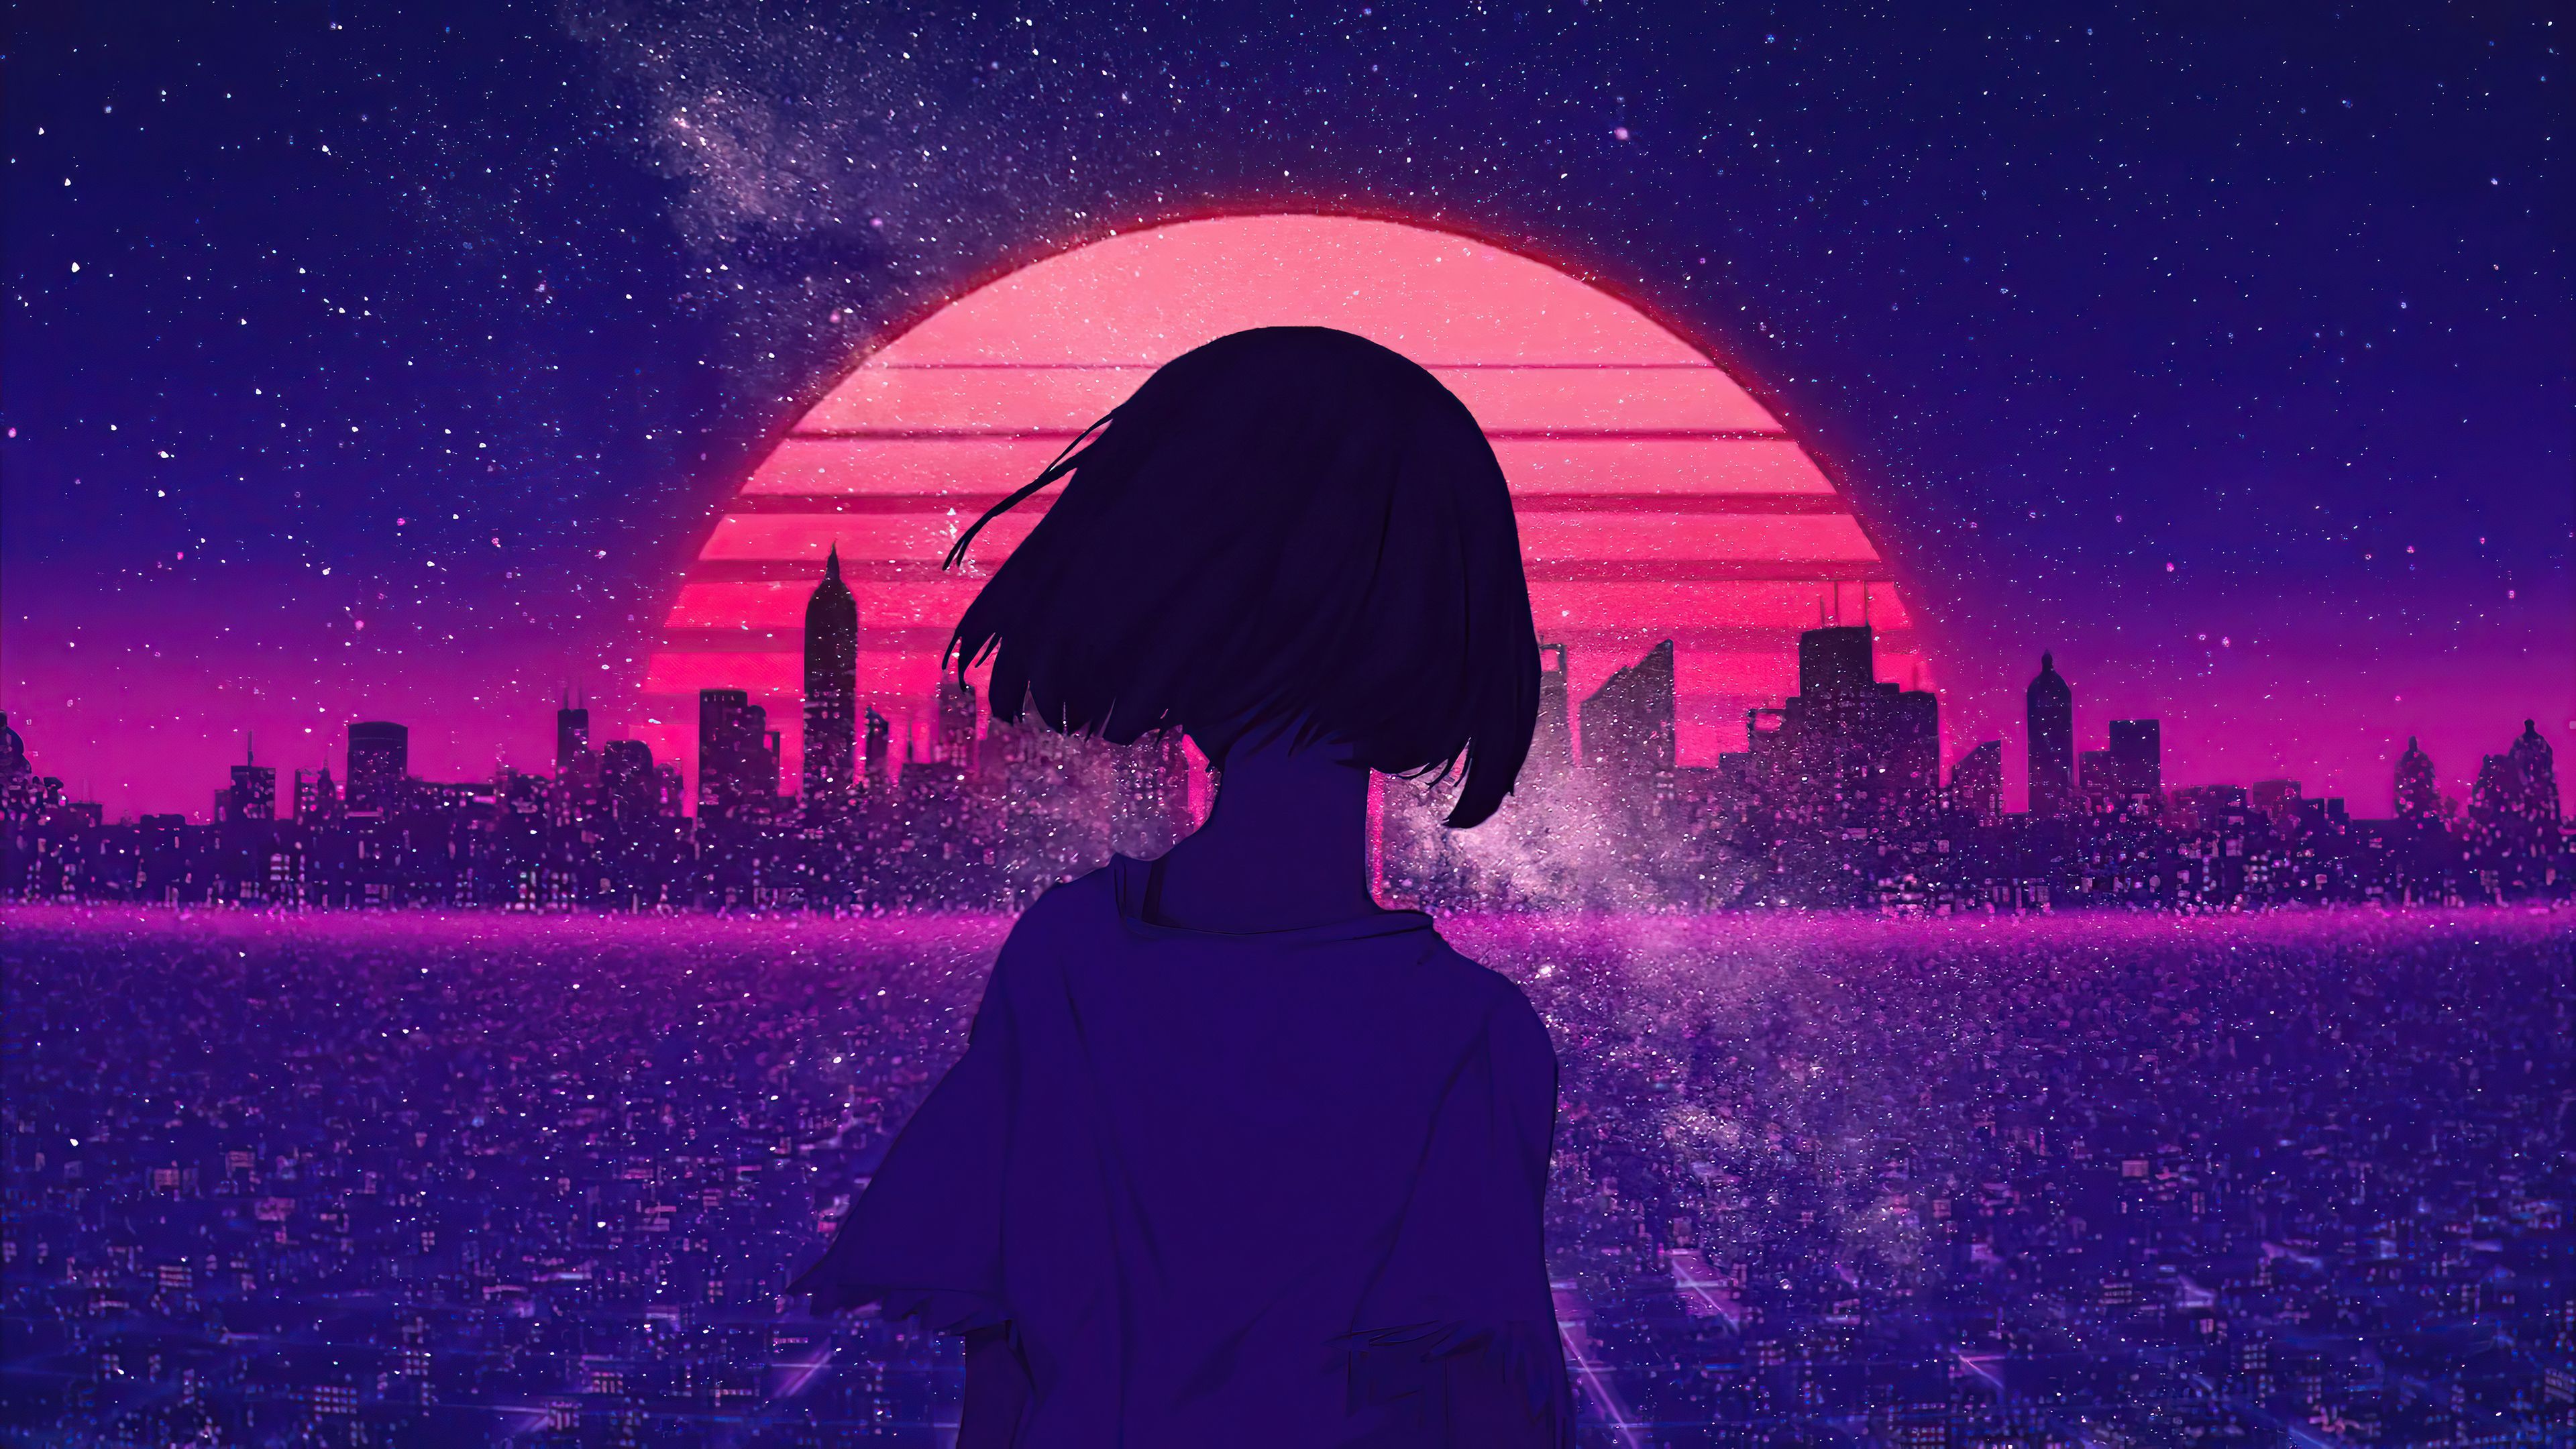 Download free Anime Boy Relaxing With Music Wallpaper - MrWallpaper.com